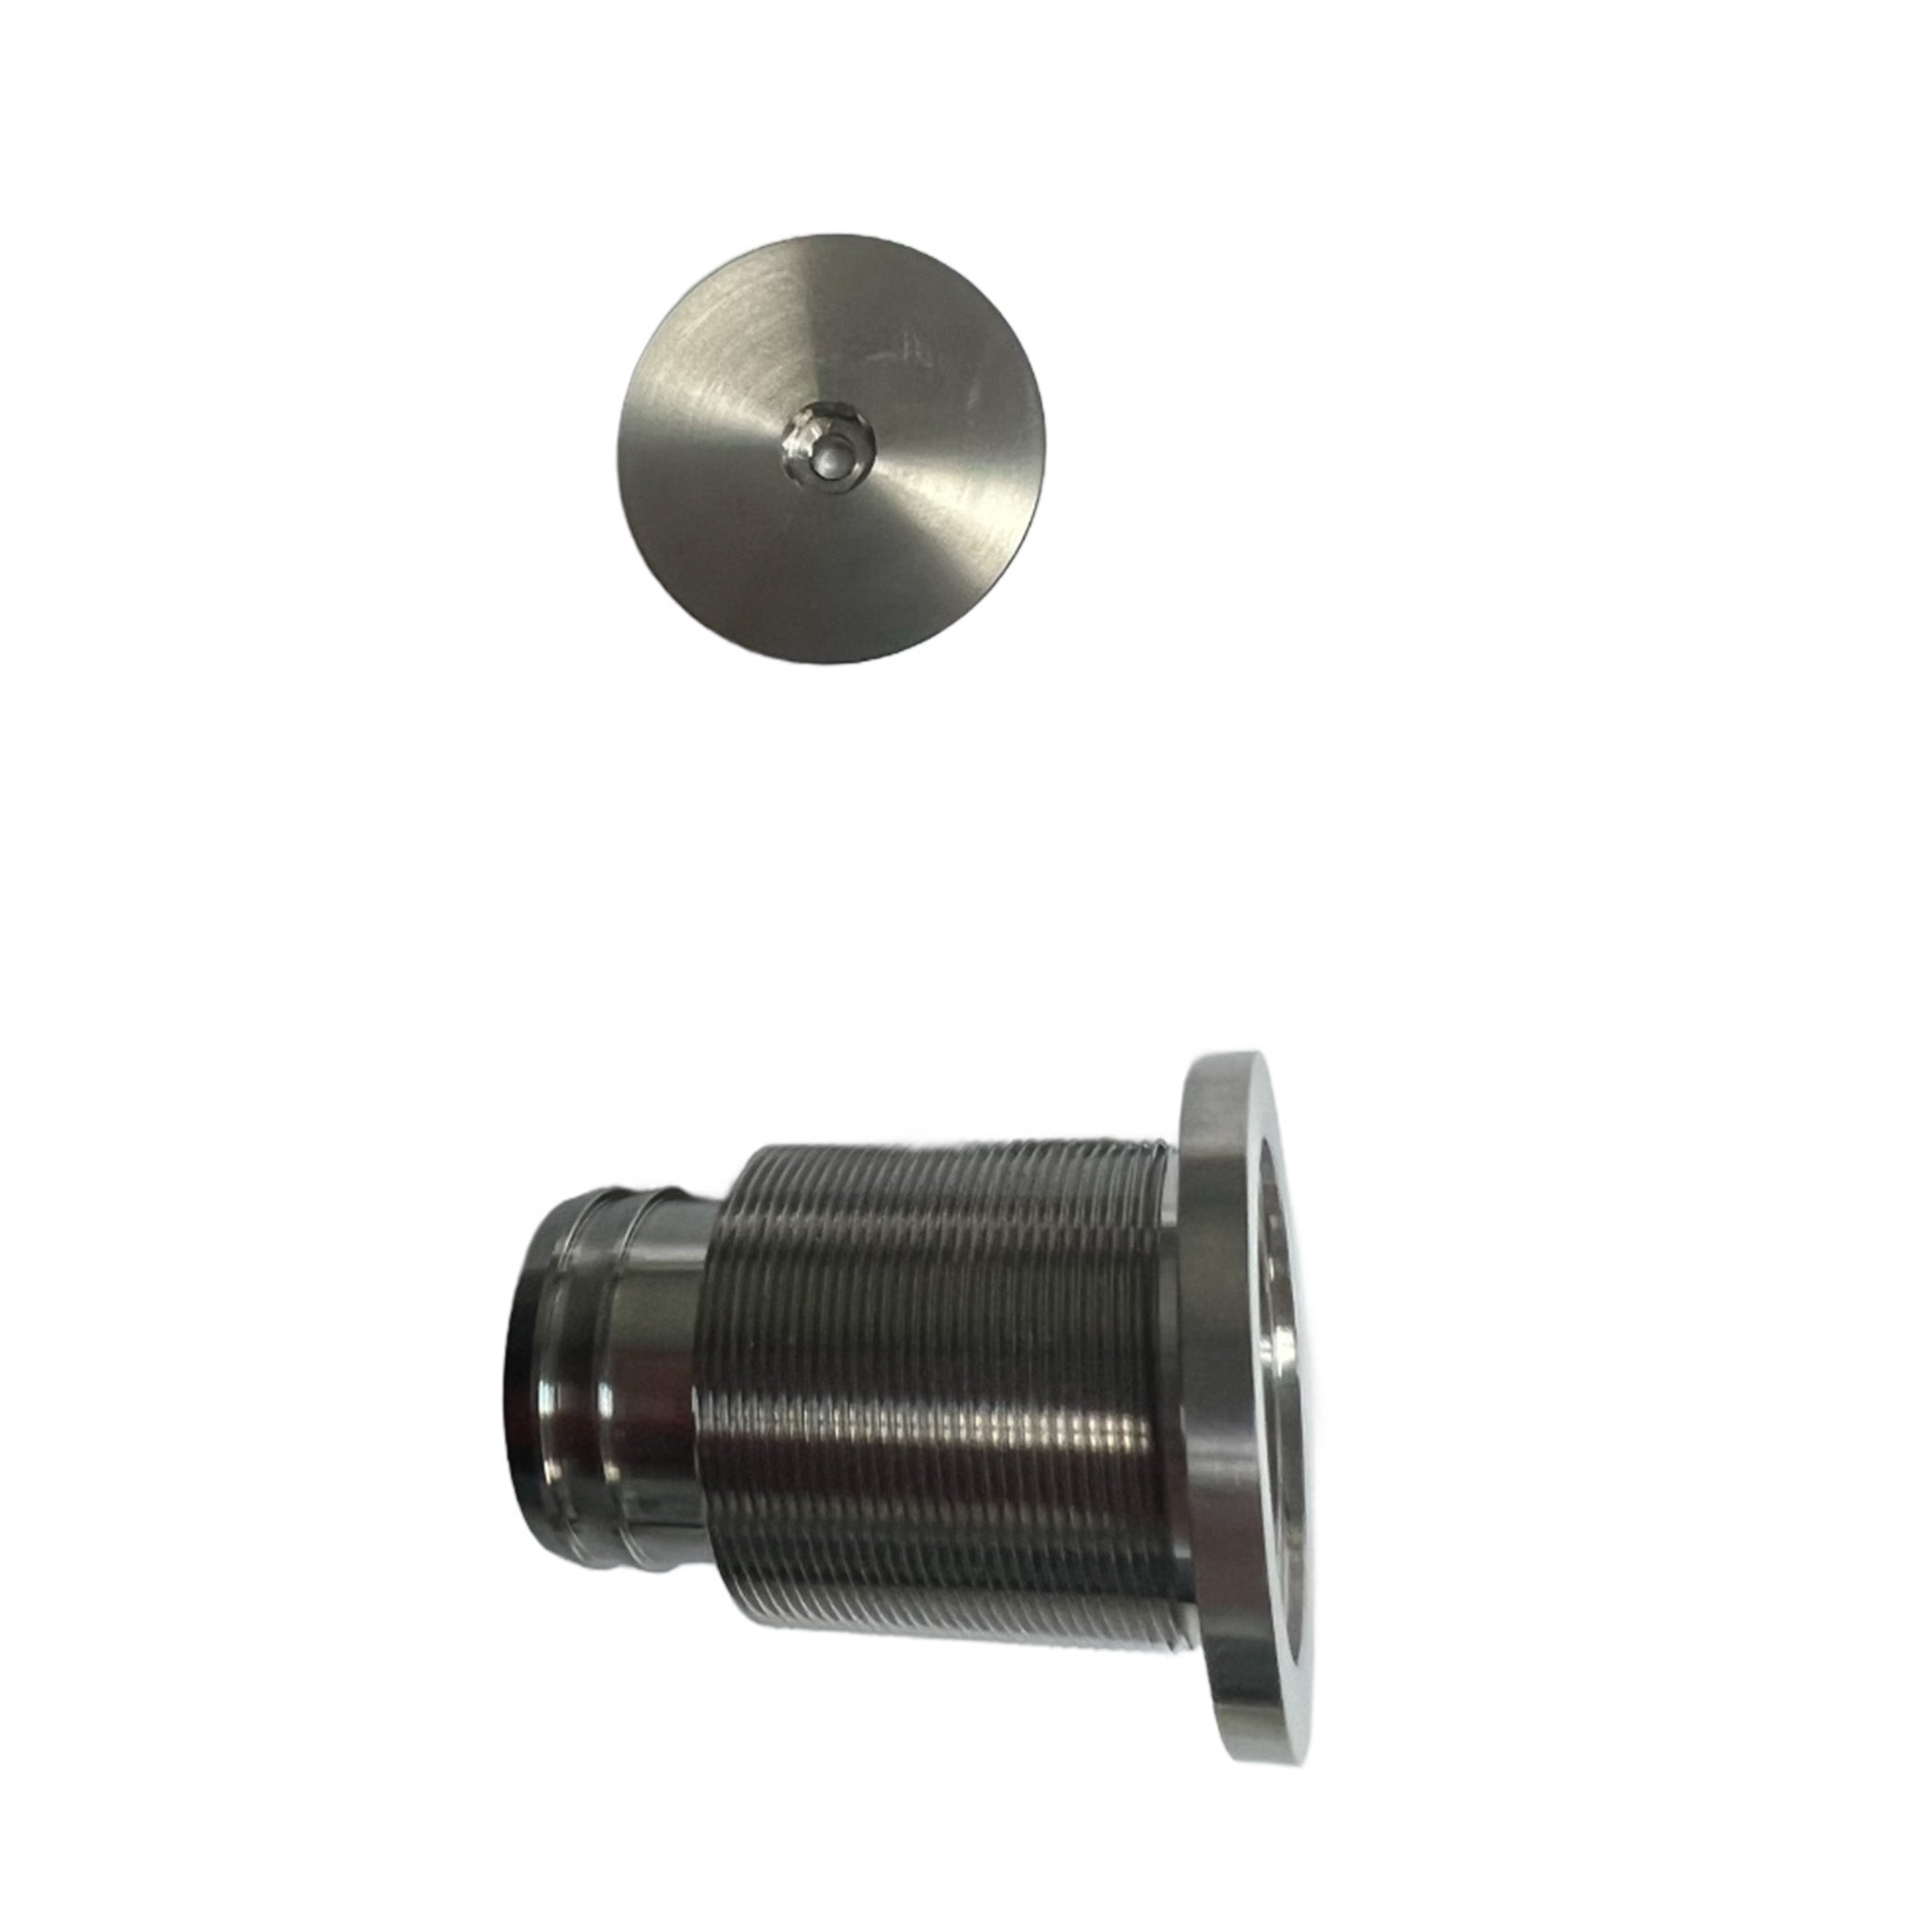 SD12TOPFILL KIT - Deck Mounted Top Feed for SD12 Soap Dispenser